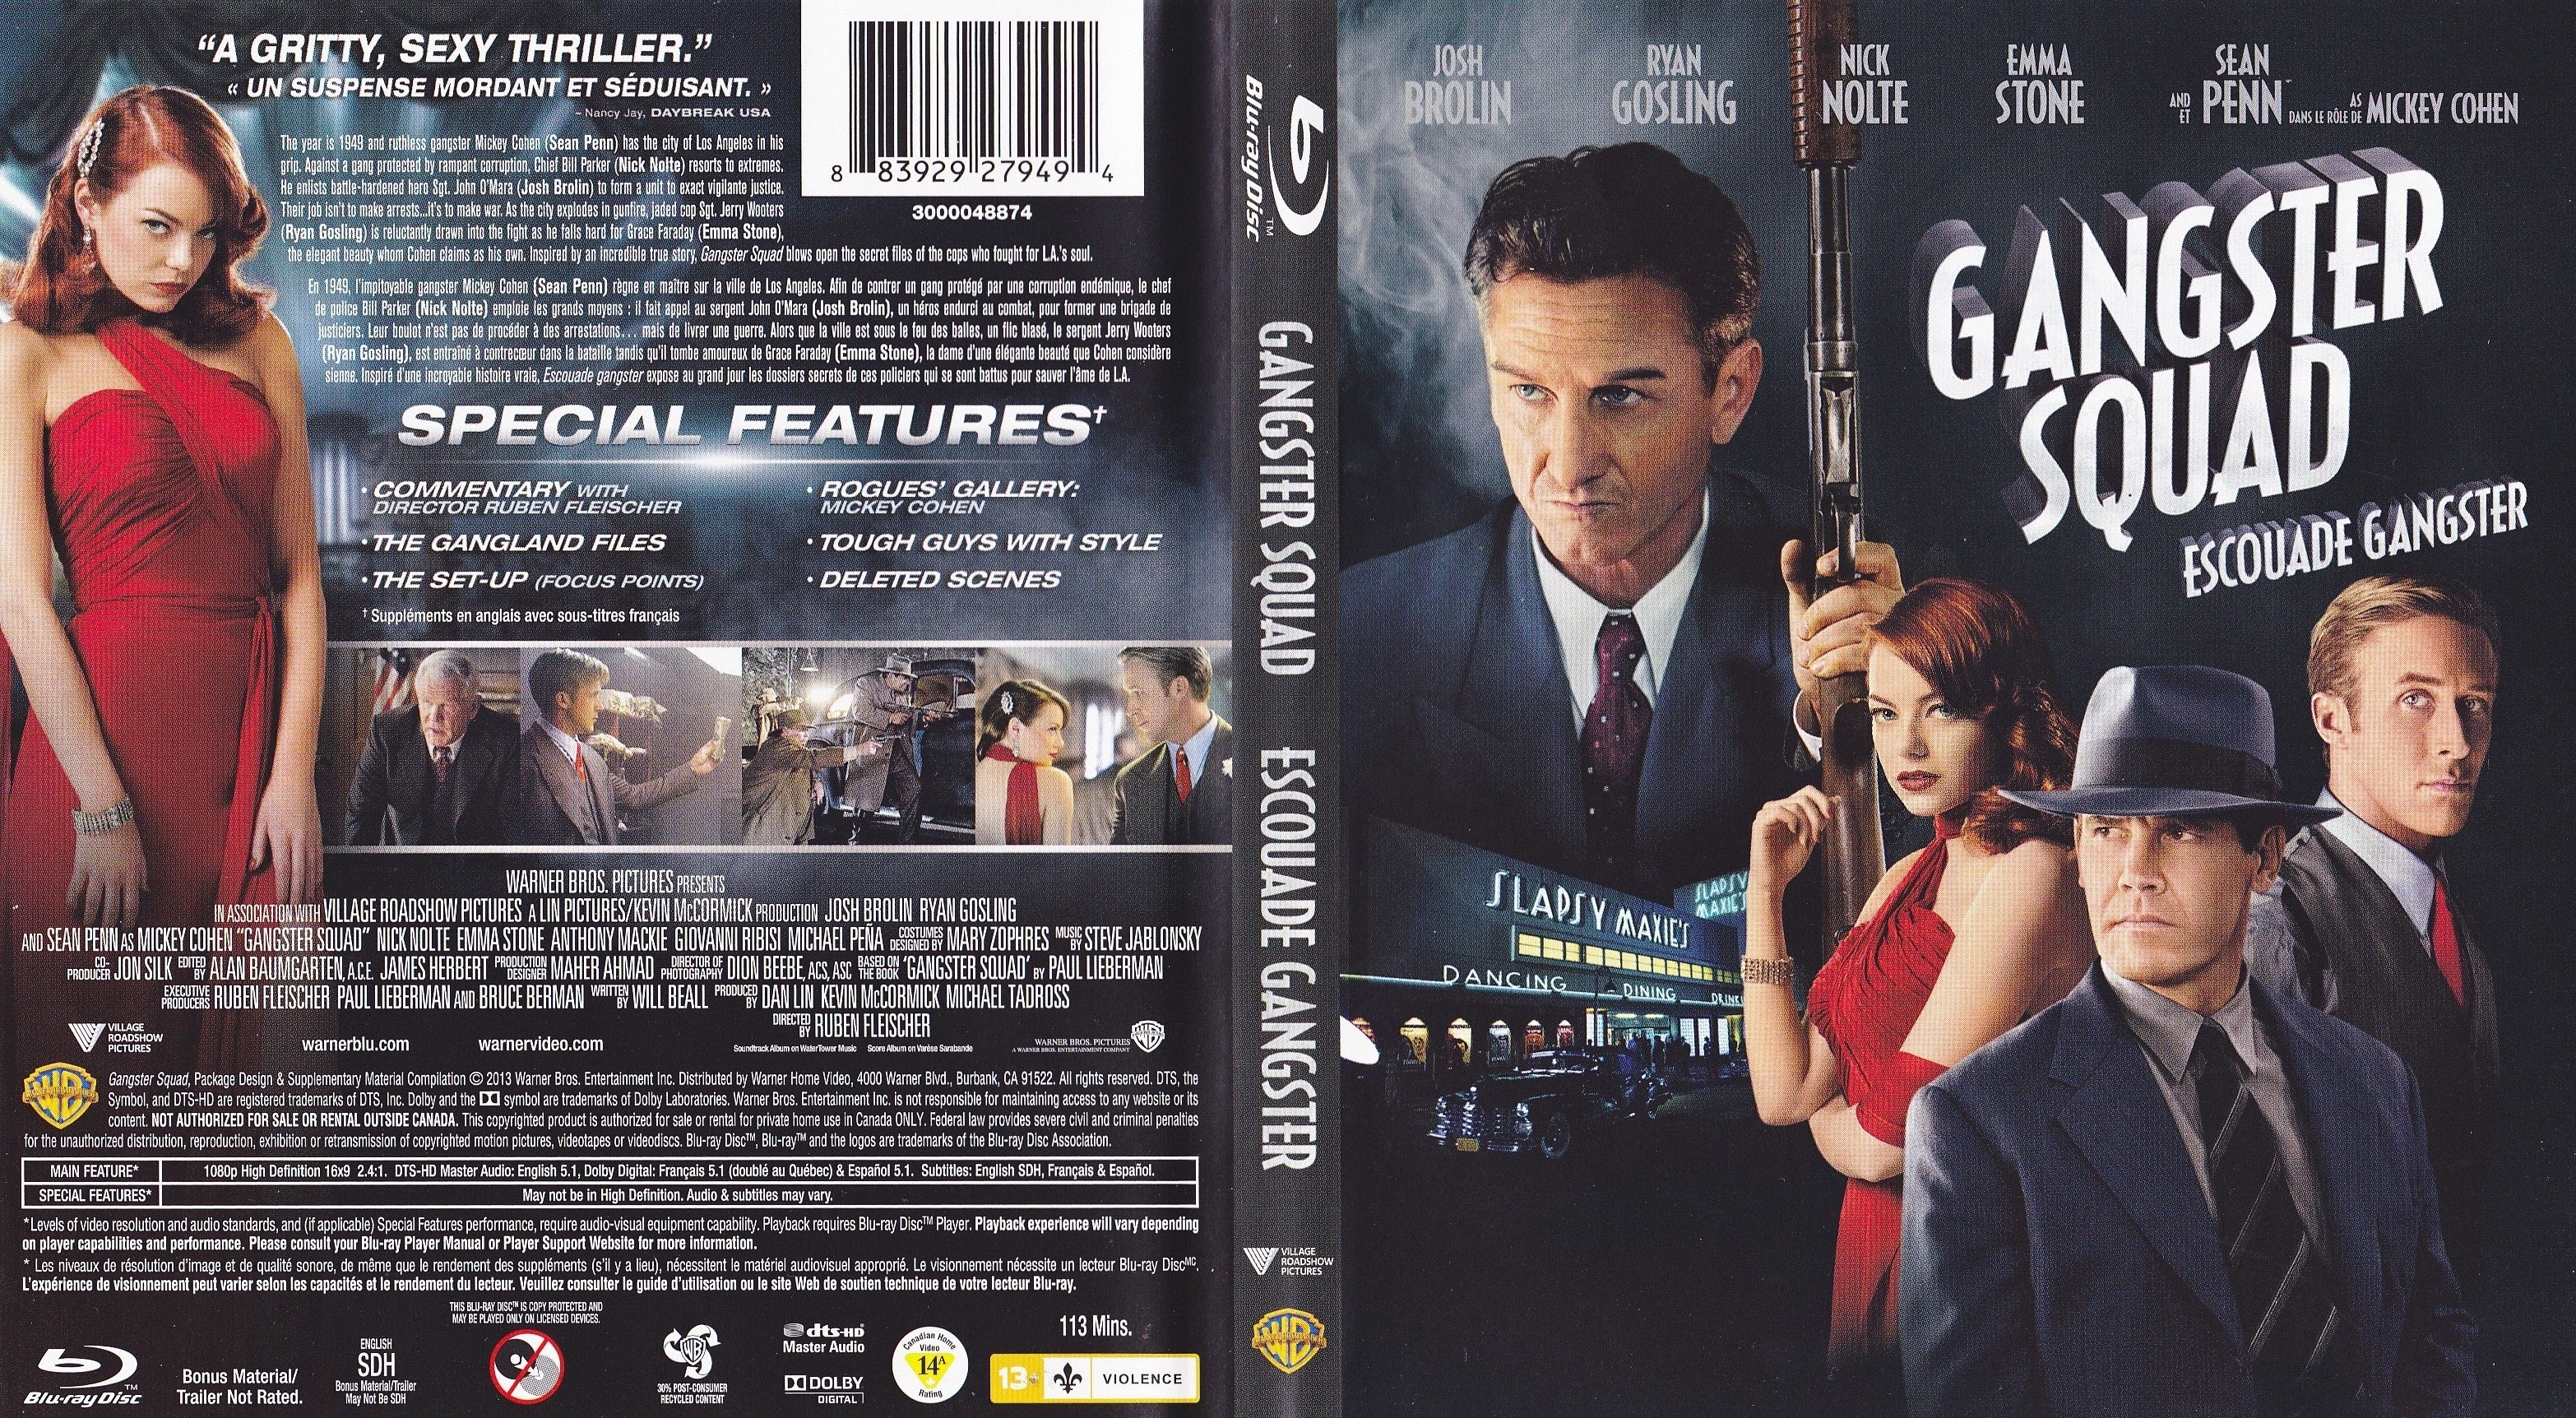 Jaquette DVD Gangster squad - Esquade gangster (Canadienne) (BLU-RAY)